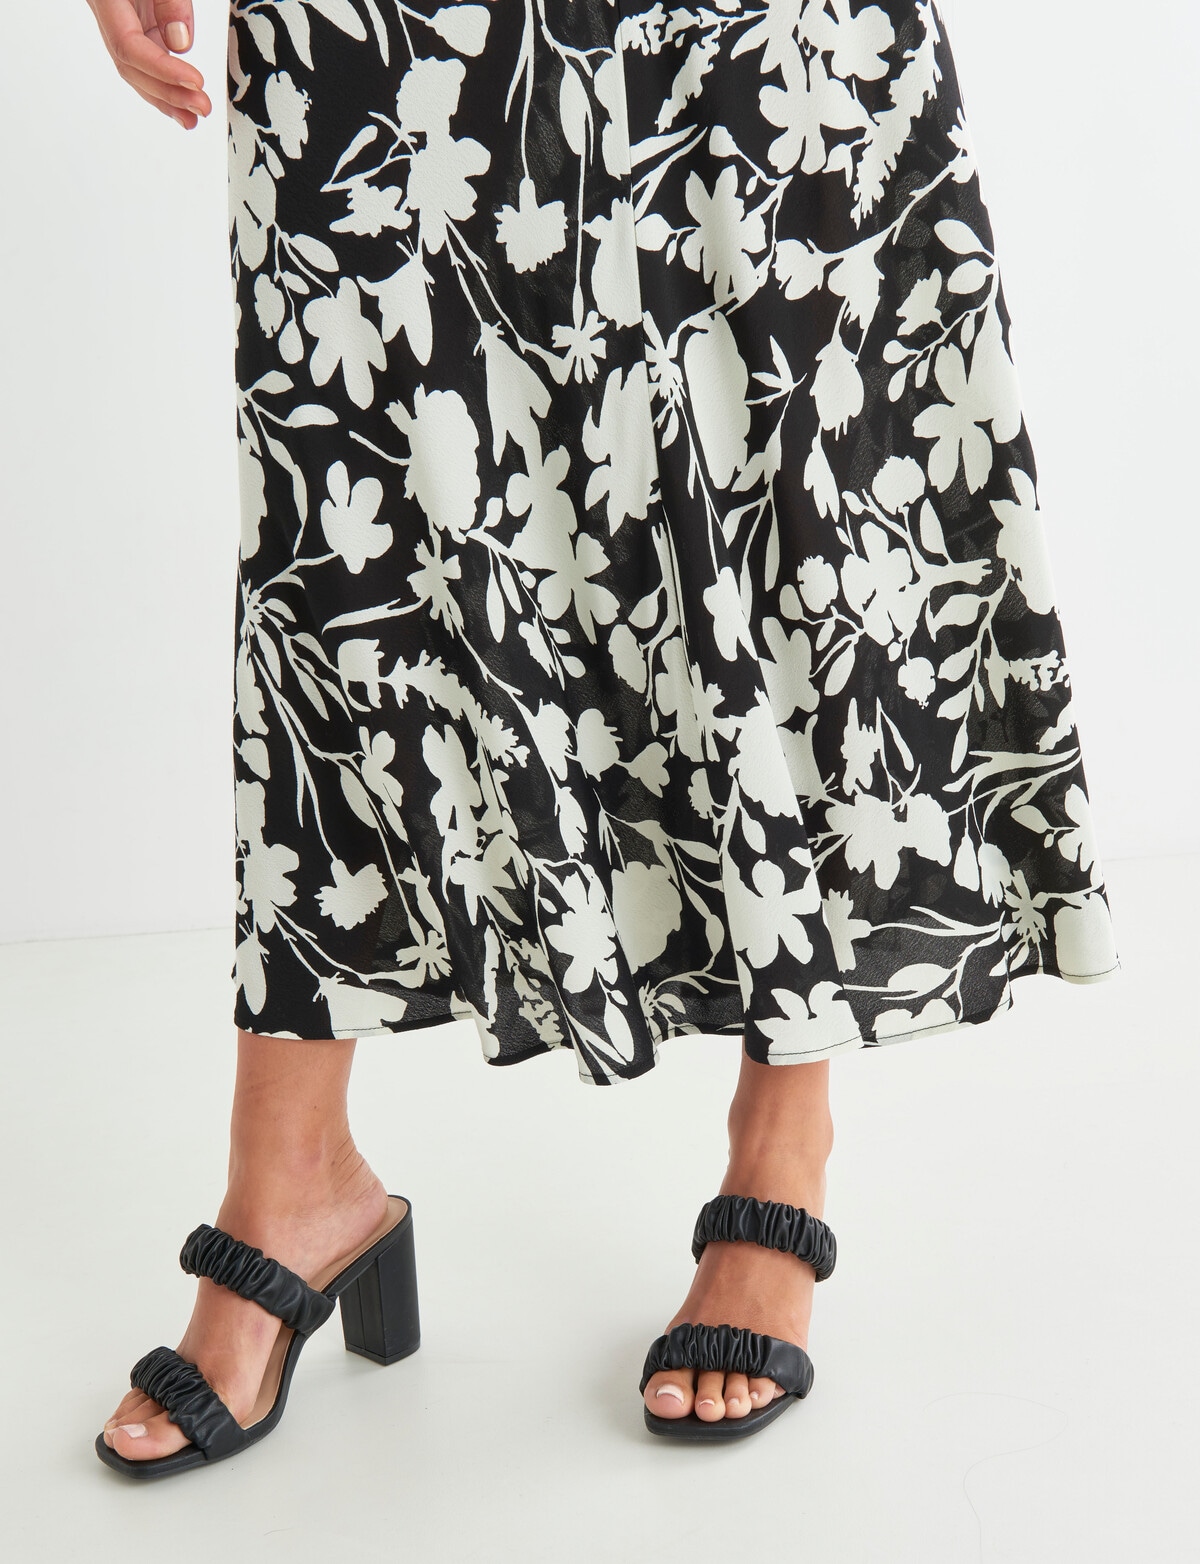 Whistle Floral Fit and Flare Midi Skirt Black & White - Skirts